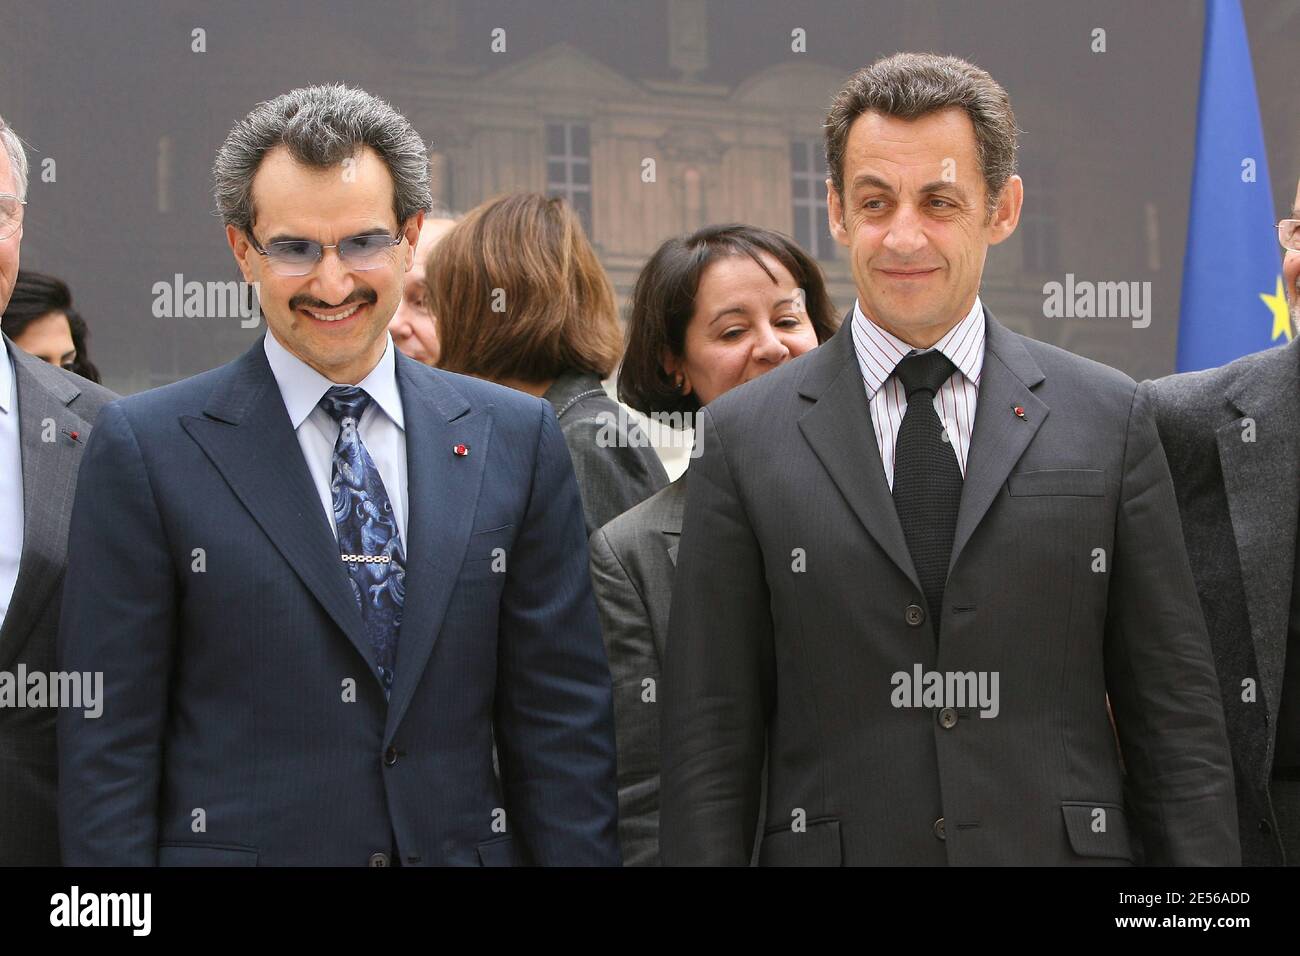 Saudi Arabian Prince Alwaleed bin Talal Bin Abdul aziz Al Saud and French President Nicolas Sarkozy behind the first stone of the Louvre museum's future Islamic art department at Louvre Museum's in Paris, France, on July 16, 2008 during the ceremony marking the launch of the works. Photo by Pierre Villard/Pool/ABACAPRESS.COM Stock Photo